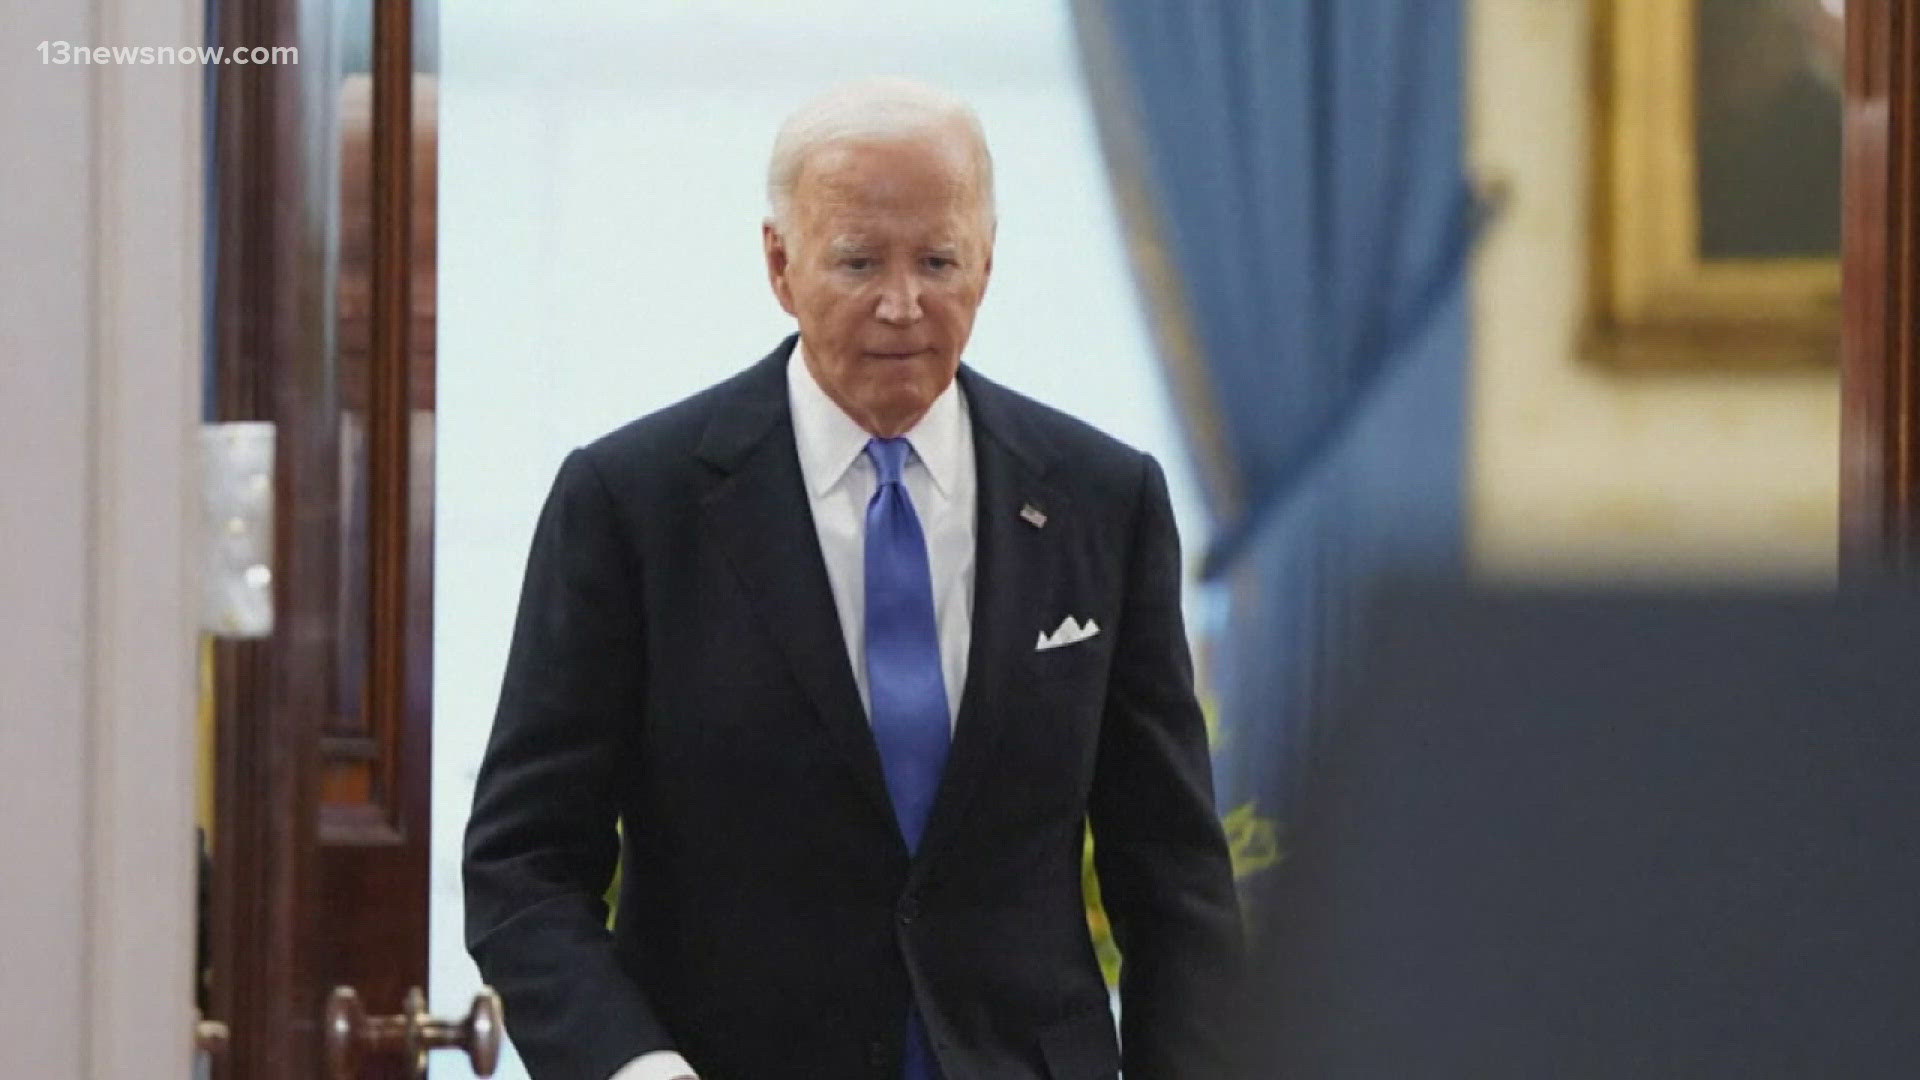 There is now a call within Congress for President Biden to drop out of the race for president.